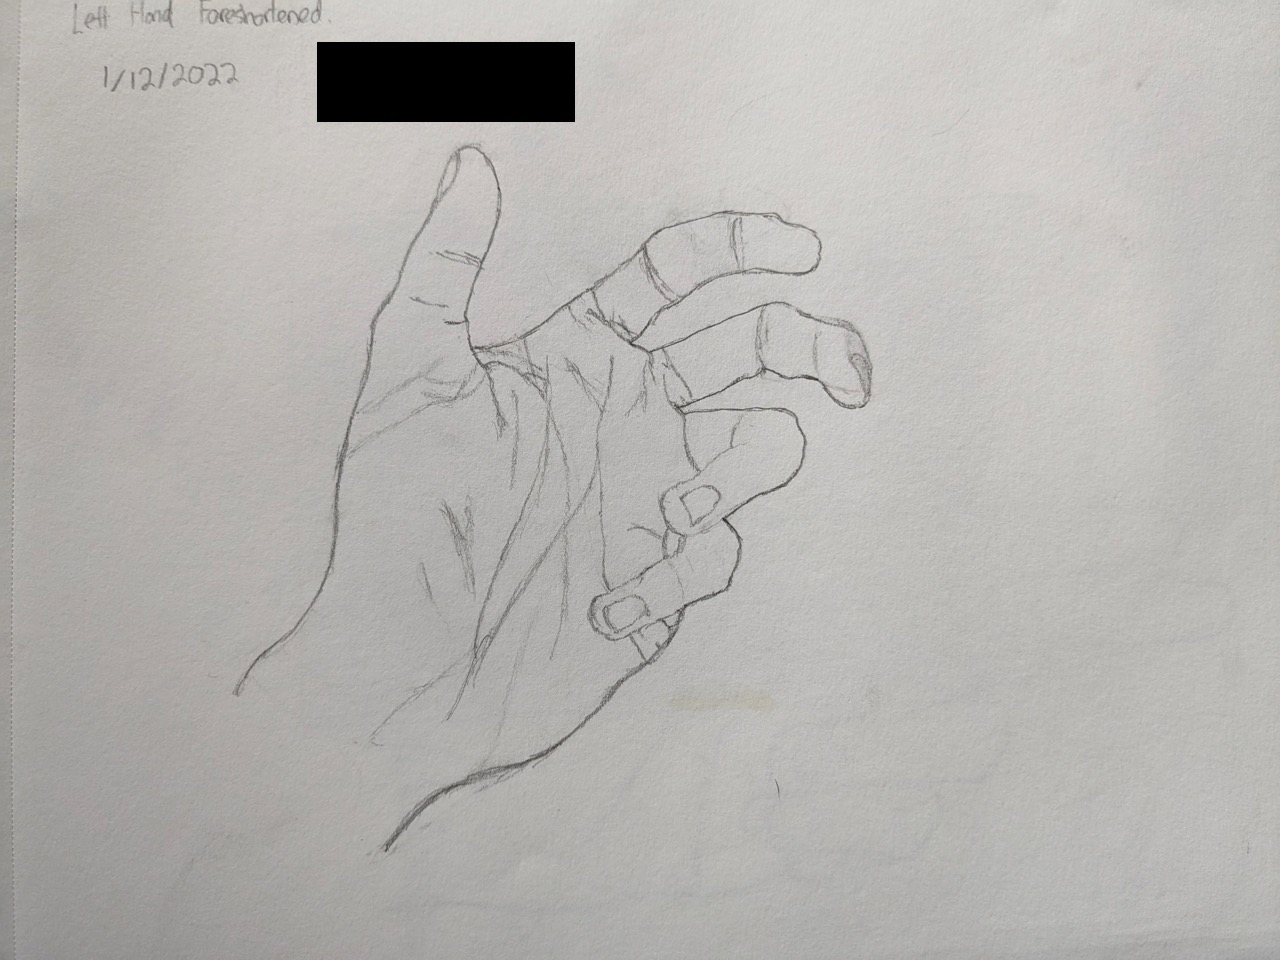 A pretty good hand drawn from a foreshortened perspective!